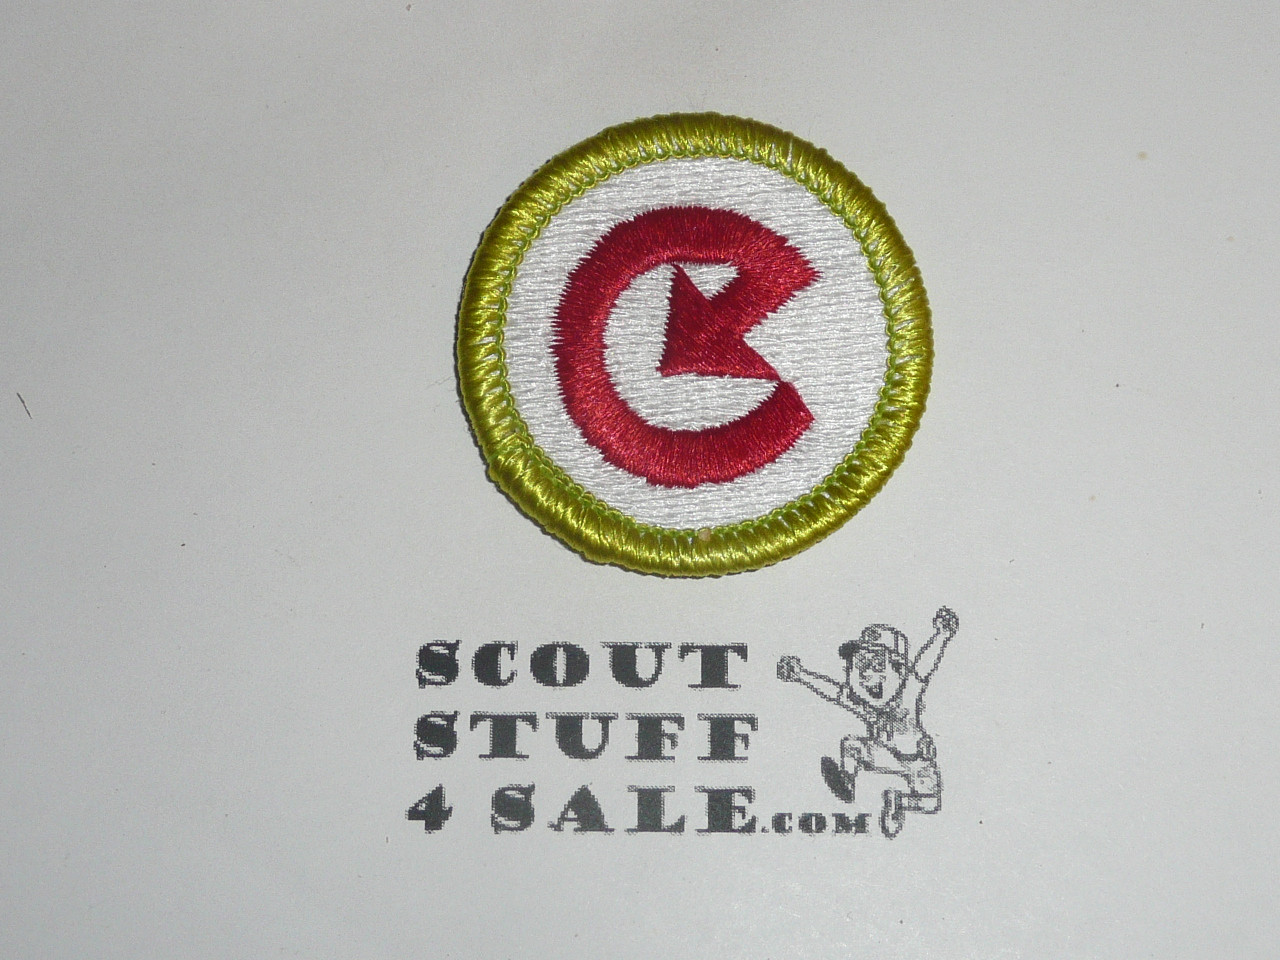 Energy - Type J - Fully Embroidered Merit Badge with Scout Stuff backing (2002-current)